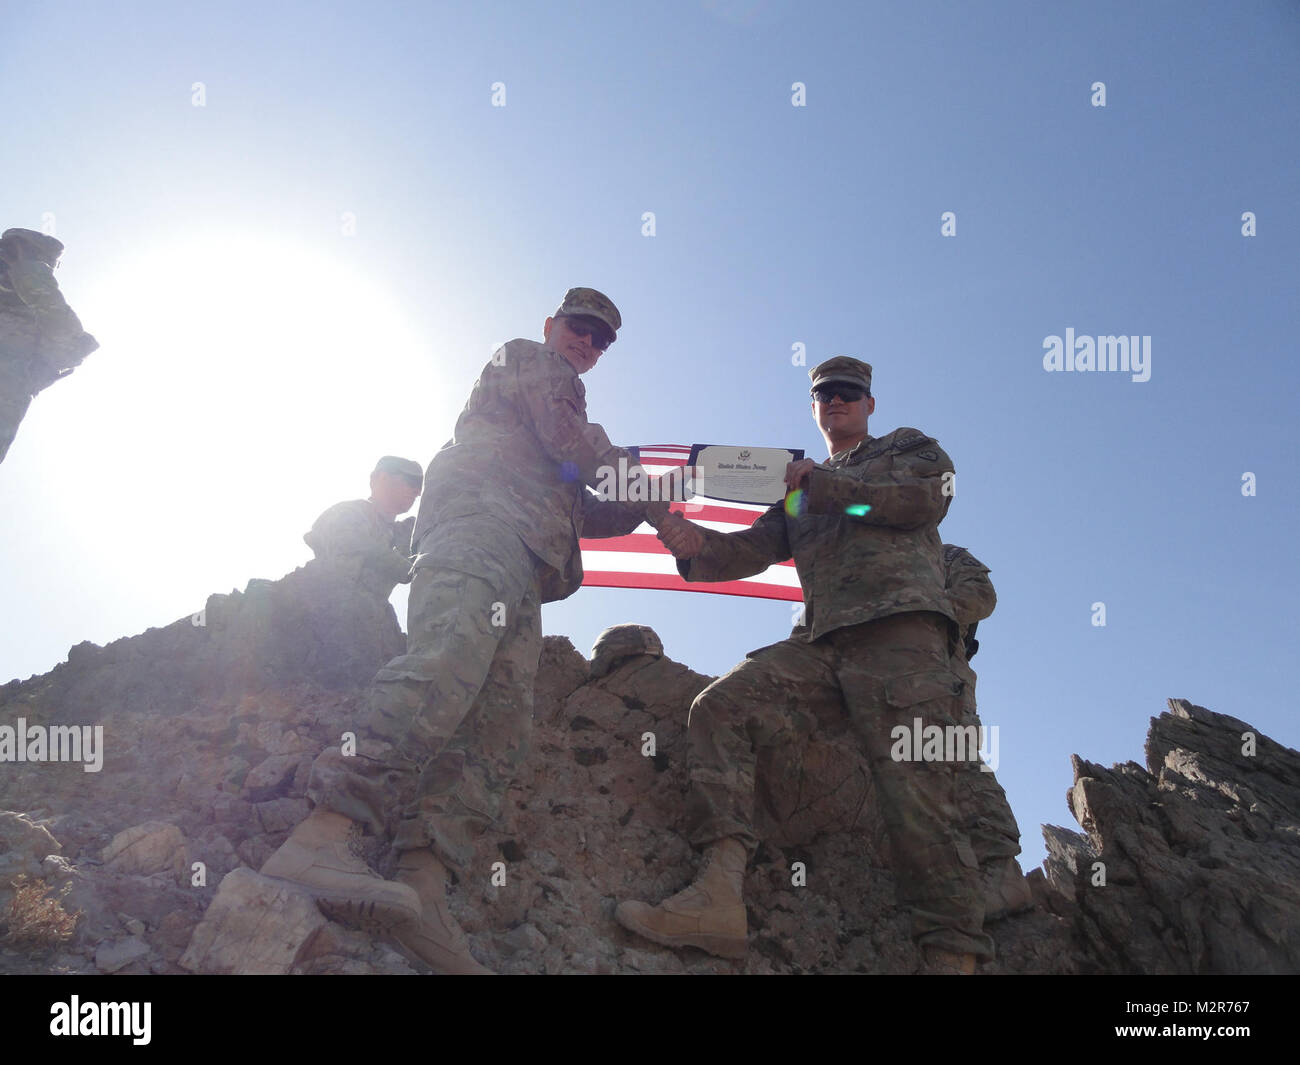 Col. Todd Wood, Commander of the 1st Stryker Brigade Combat Team, 25th Infantry Division, reenlists Cpl. Wiley Pritchett, an infantryman with the 1/25 SBCT Tactical Assault Command, in a ceremony at the top of the mountain above Forward Operating Base Masum Ghar on 2 September. U.S. Army photo by Sgt. 1st Class Melanie Currasco 1/25 SBCT Communications Shop 111002-A-3728C-007 by 1 Stryker Brigade Combat Team Arctic Wolves Stock Photo